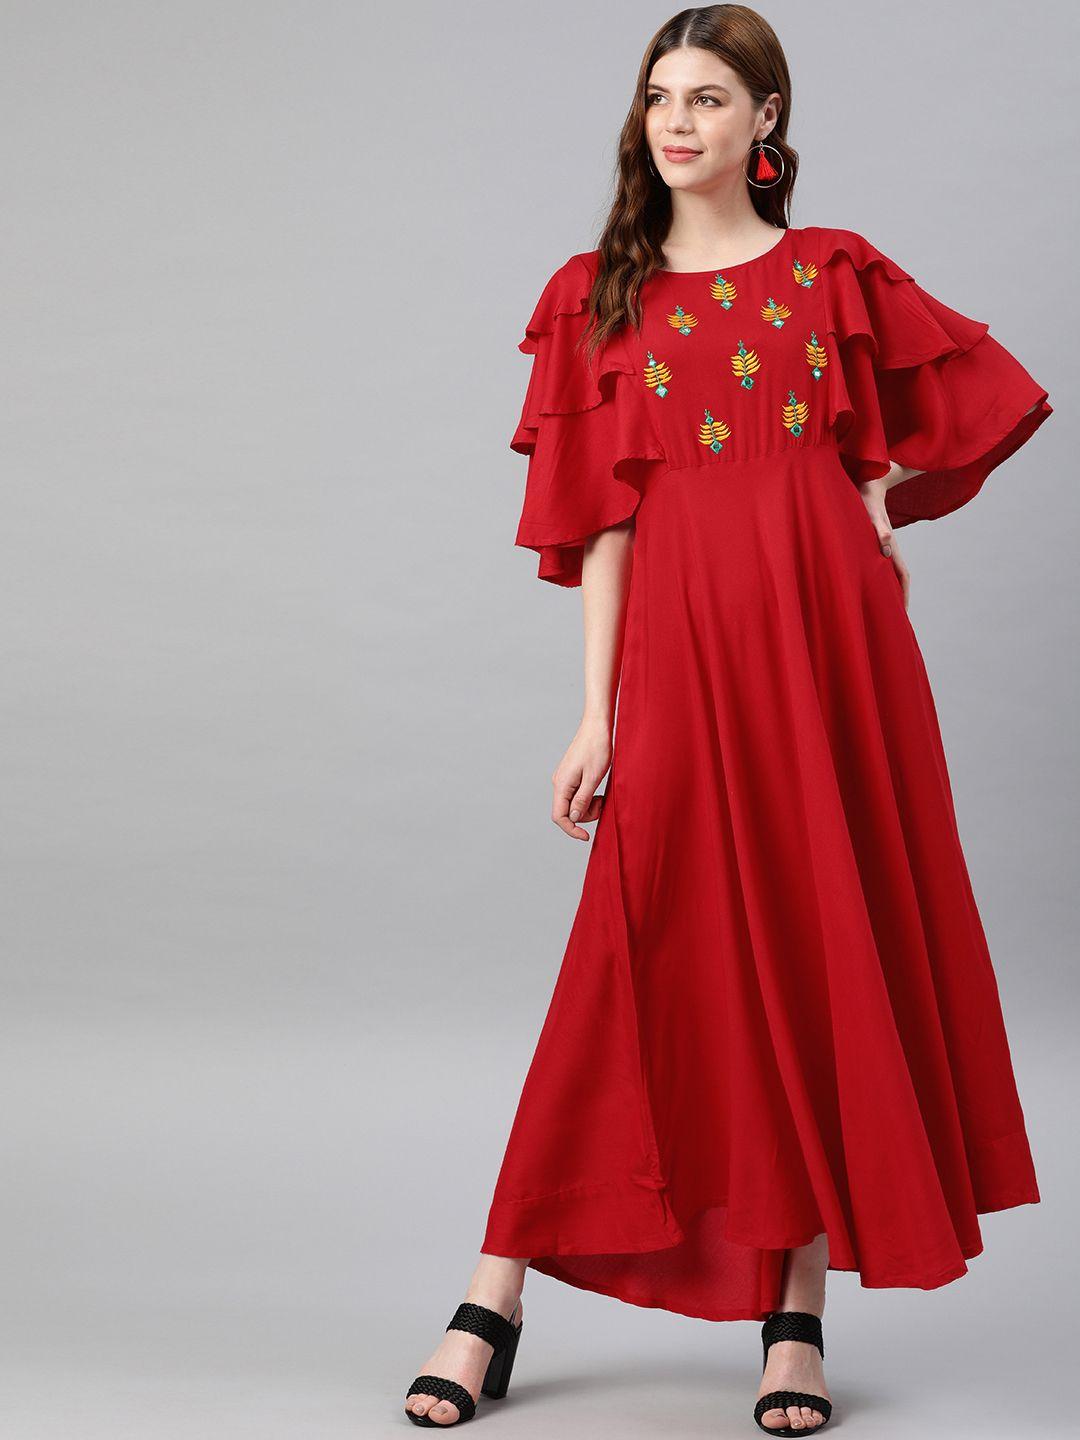 yash gallery women red solid maxi dress